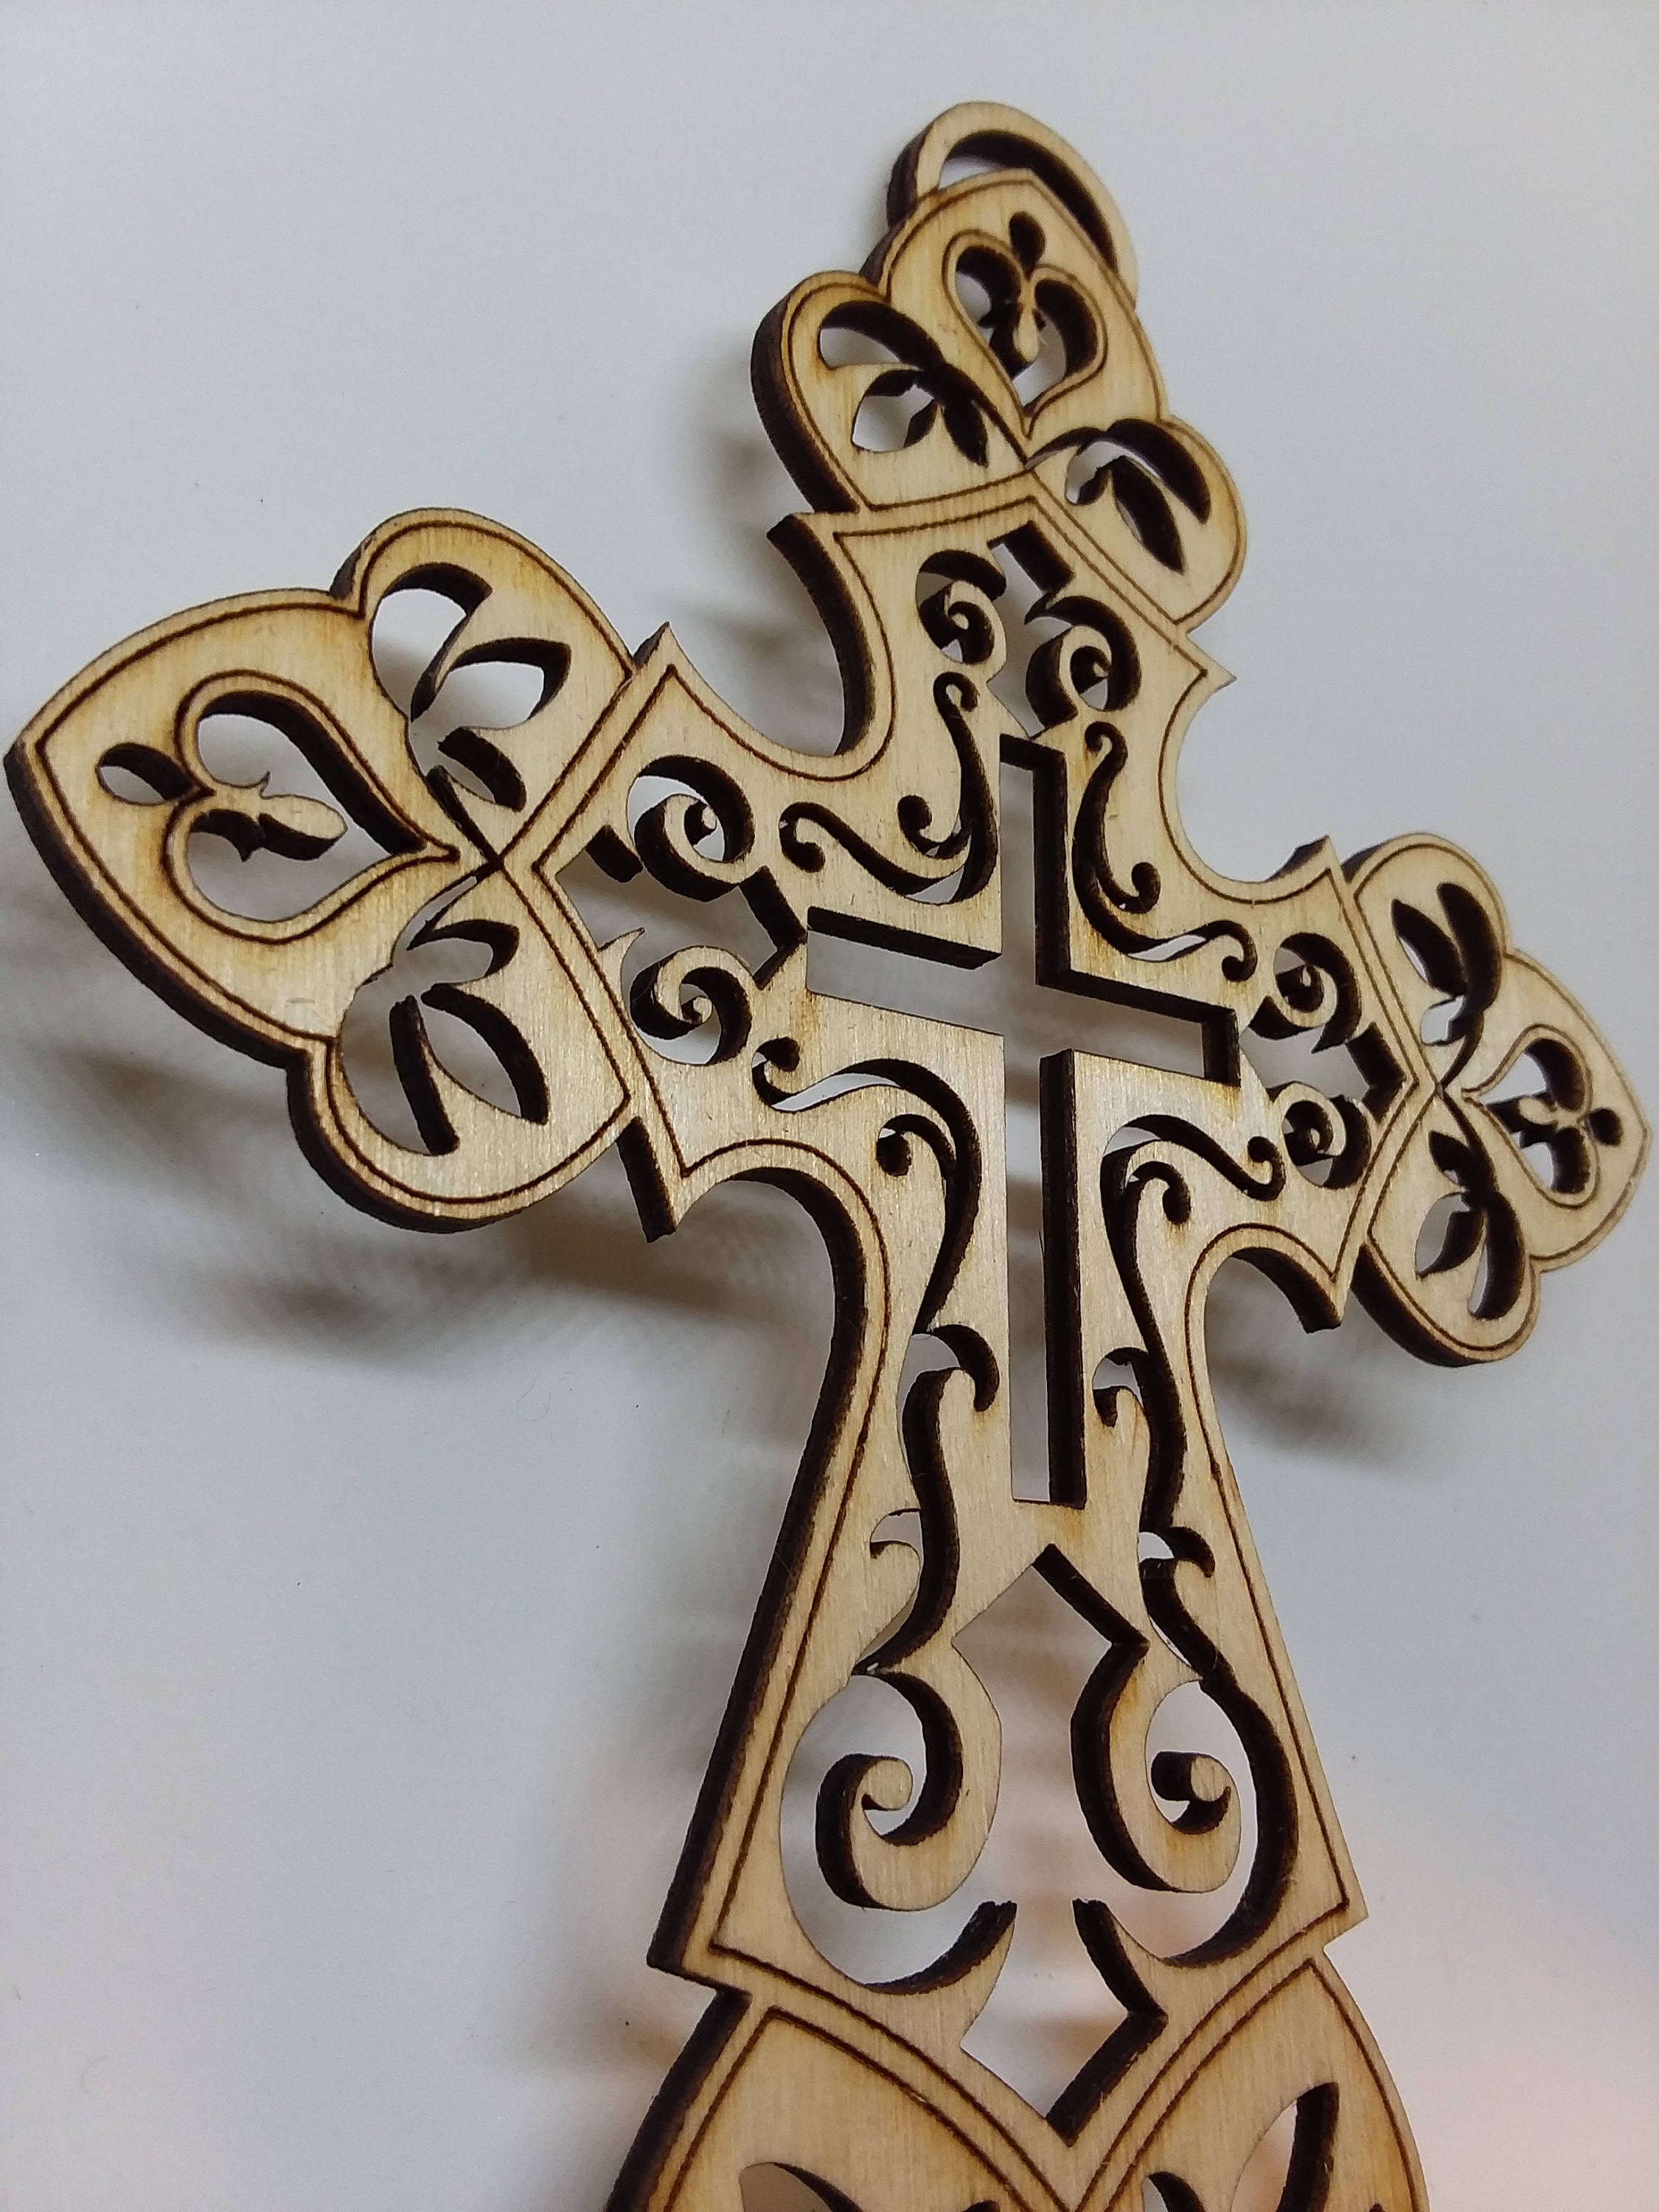 50 Pack Mini Wooden Cross Keychains for Christian Party Favors